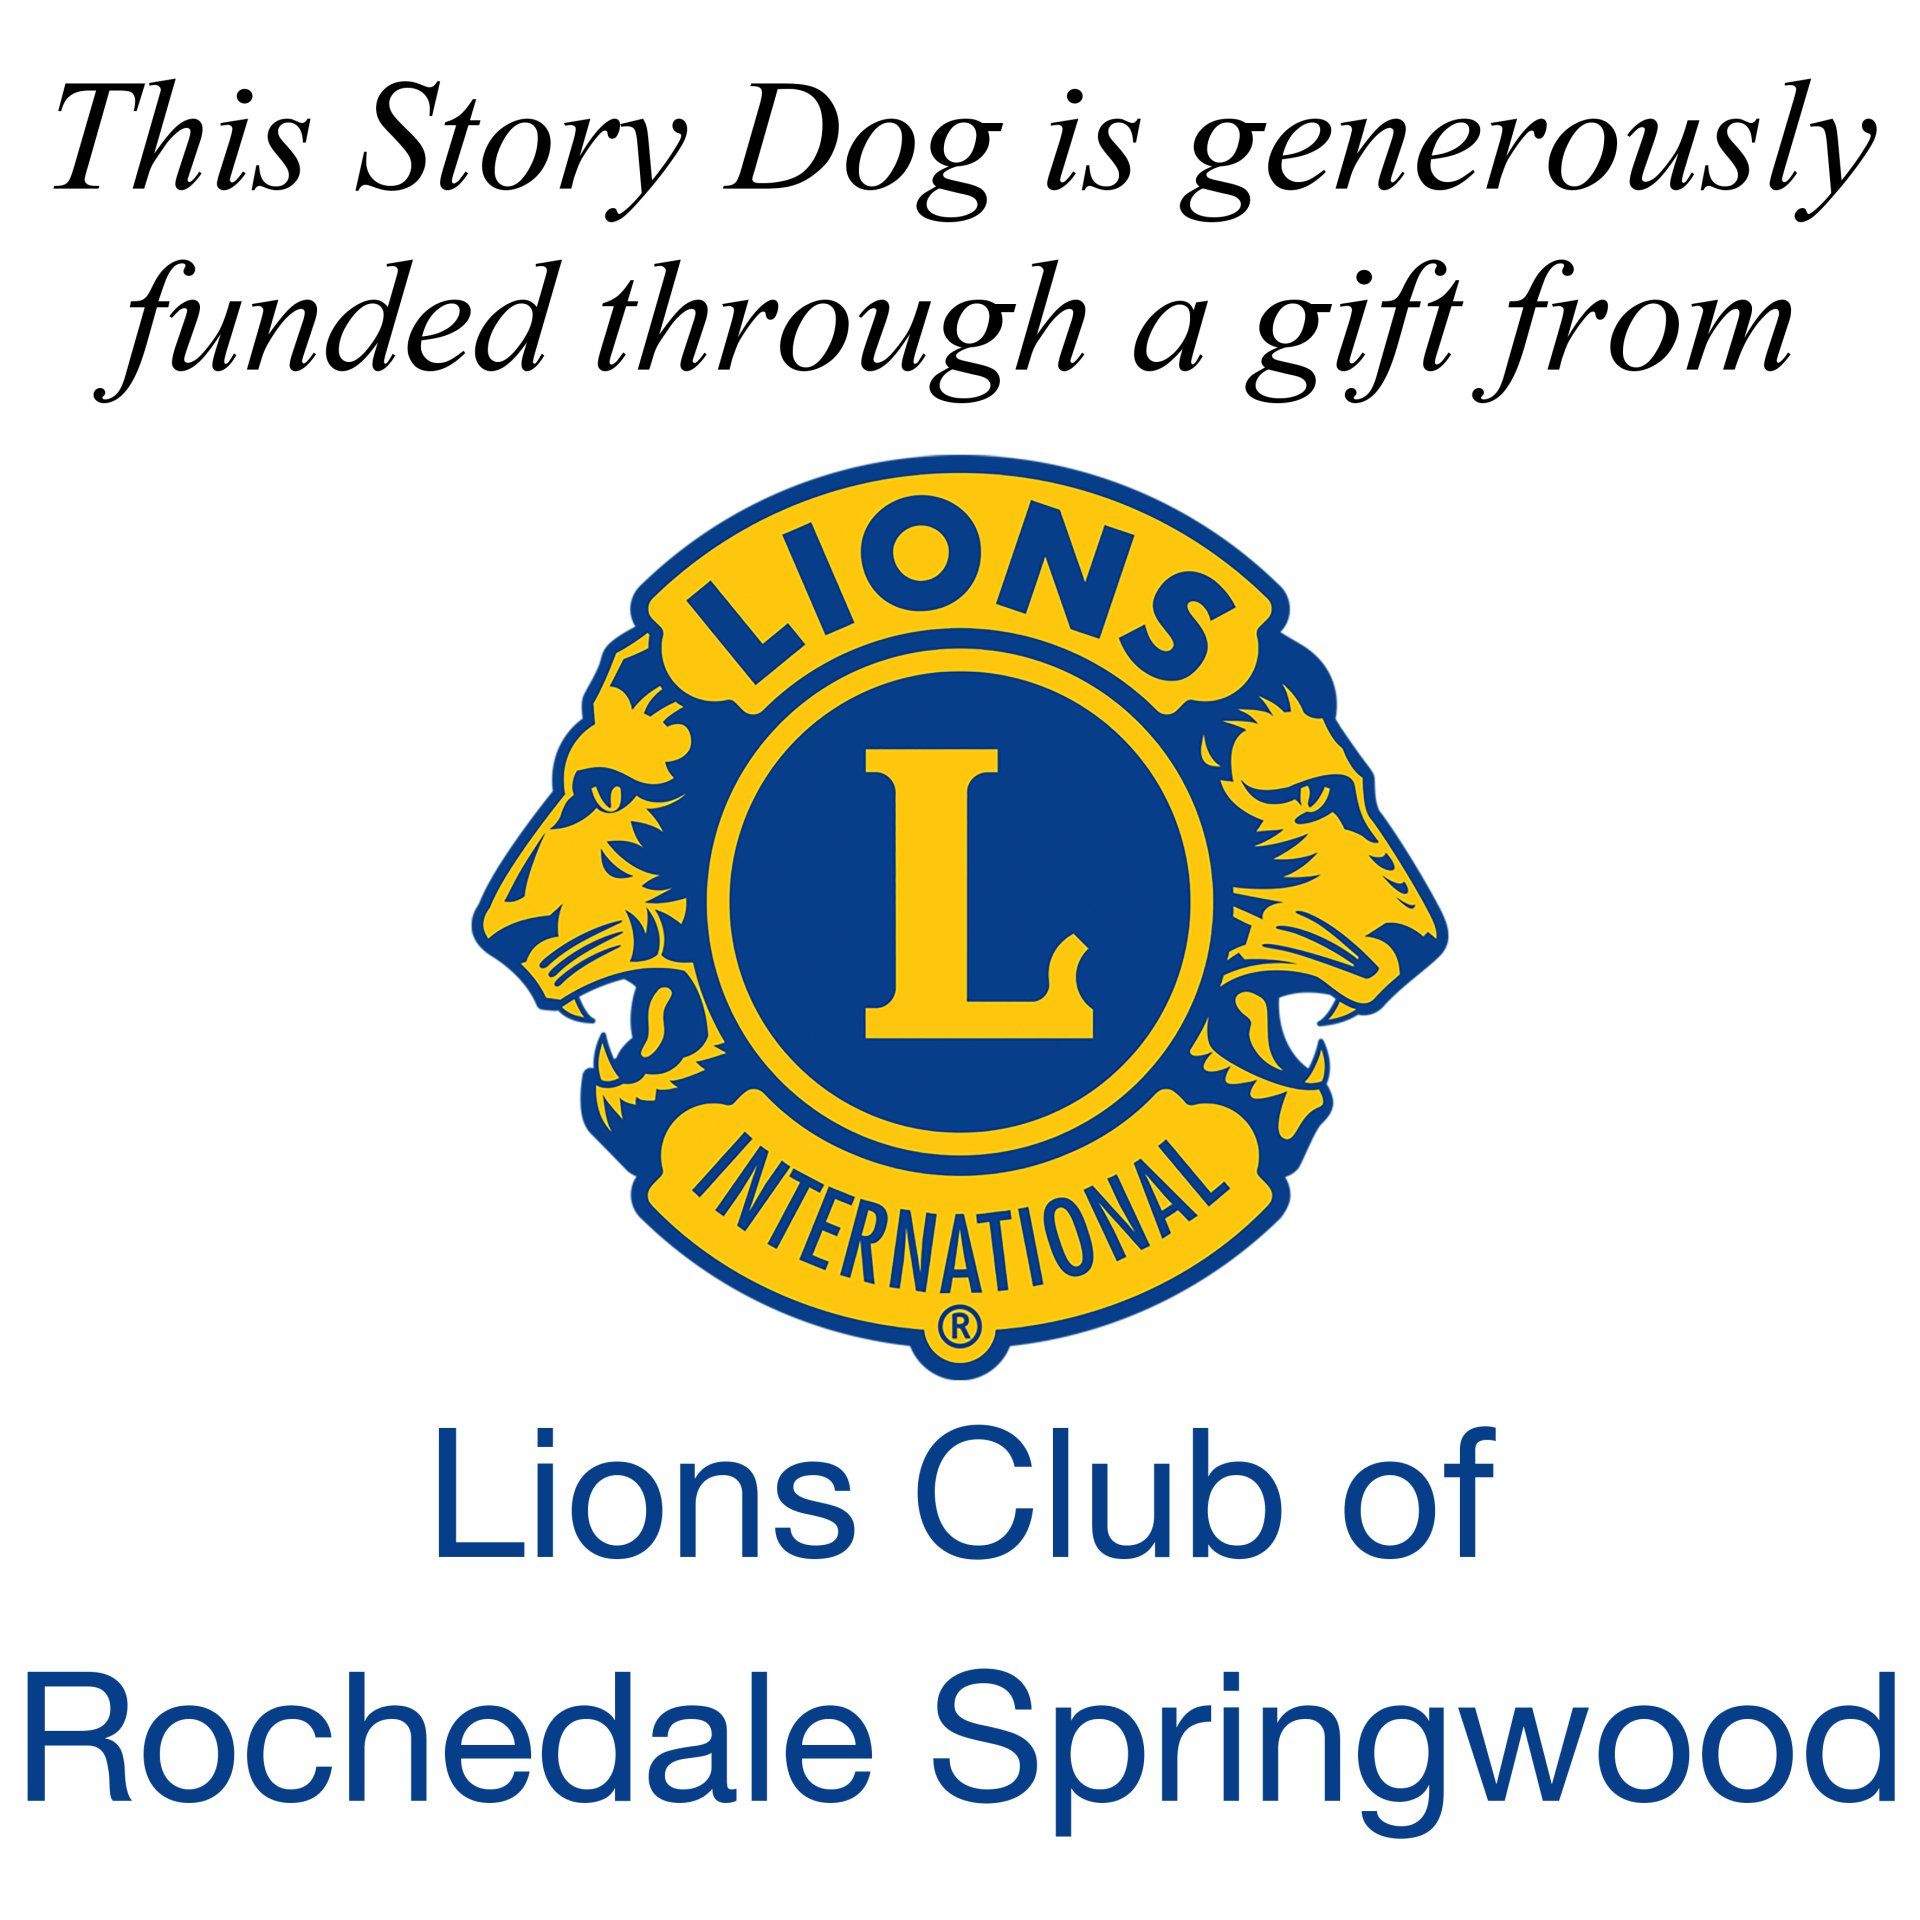 Lions Club of Rochedale Springwood